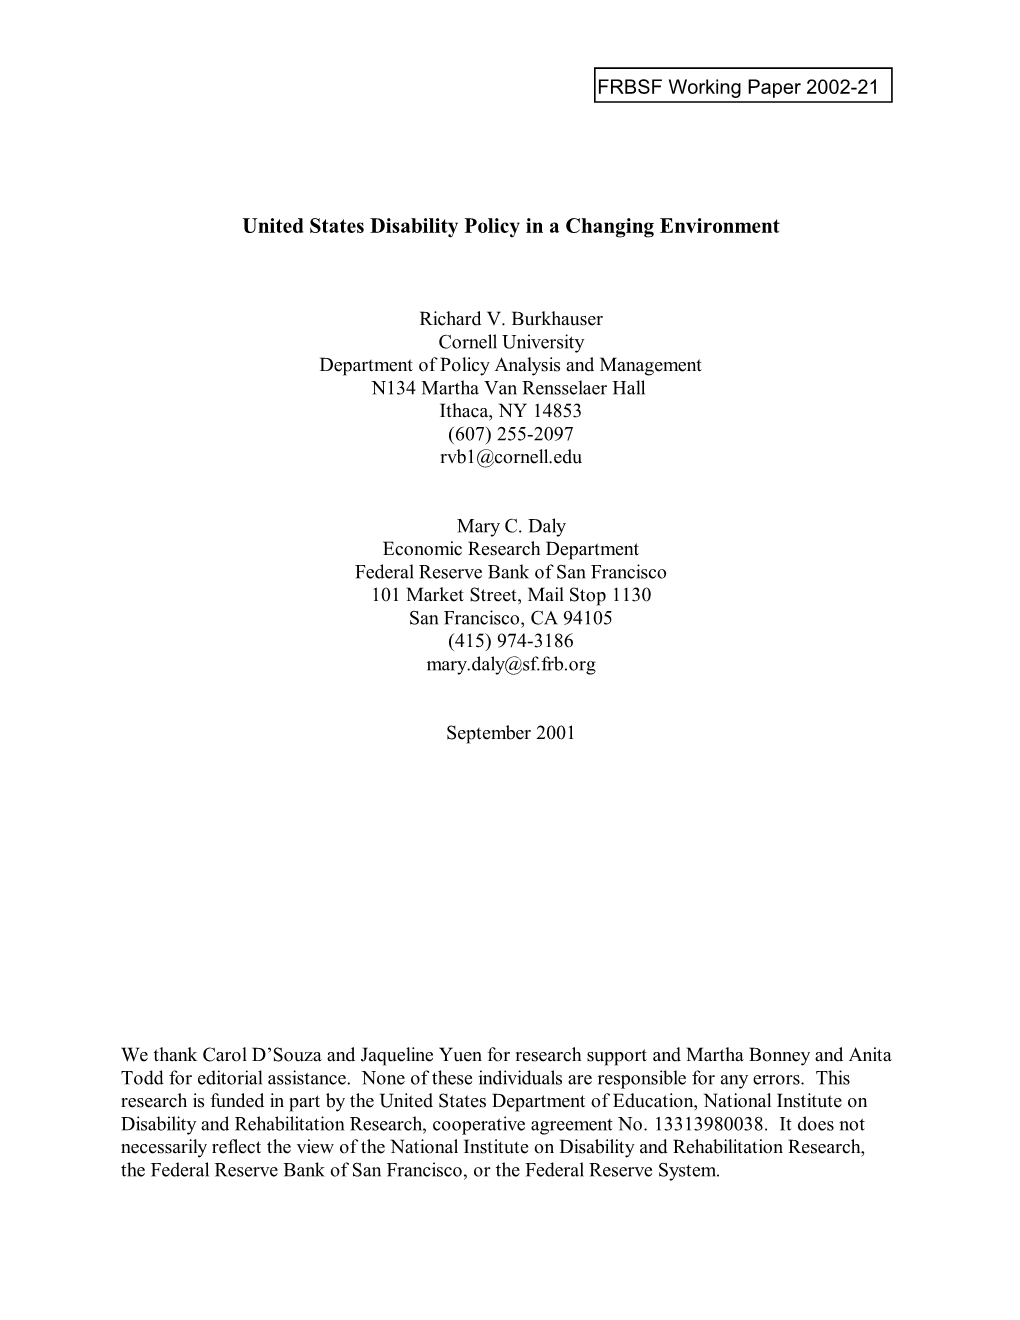 United States Disability Policy in a Changing Environment